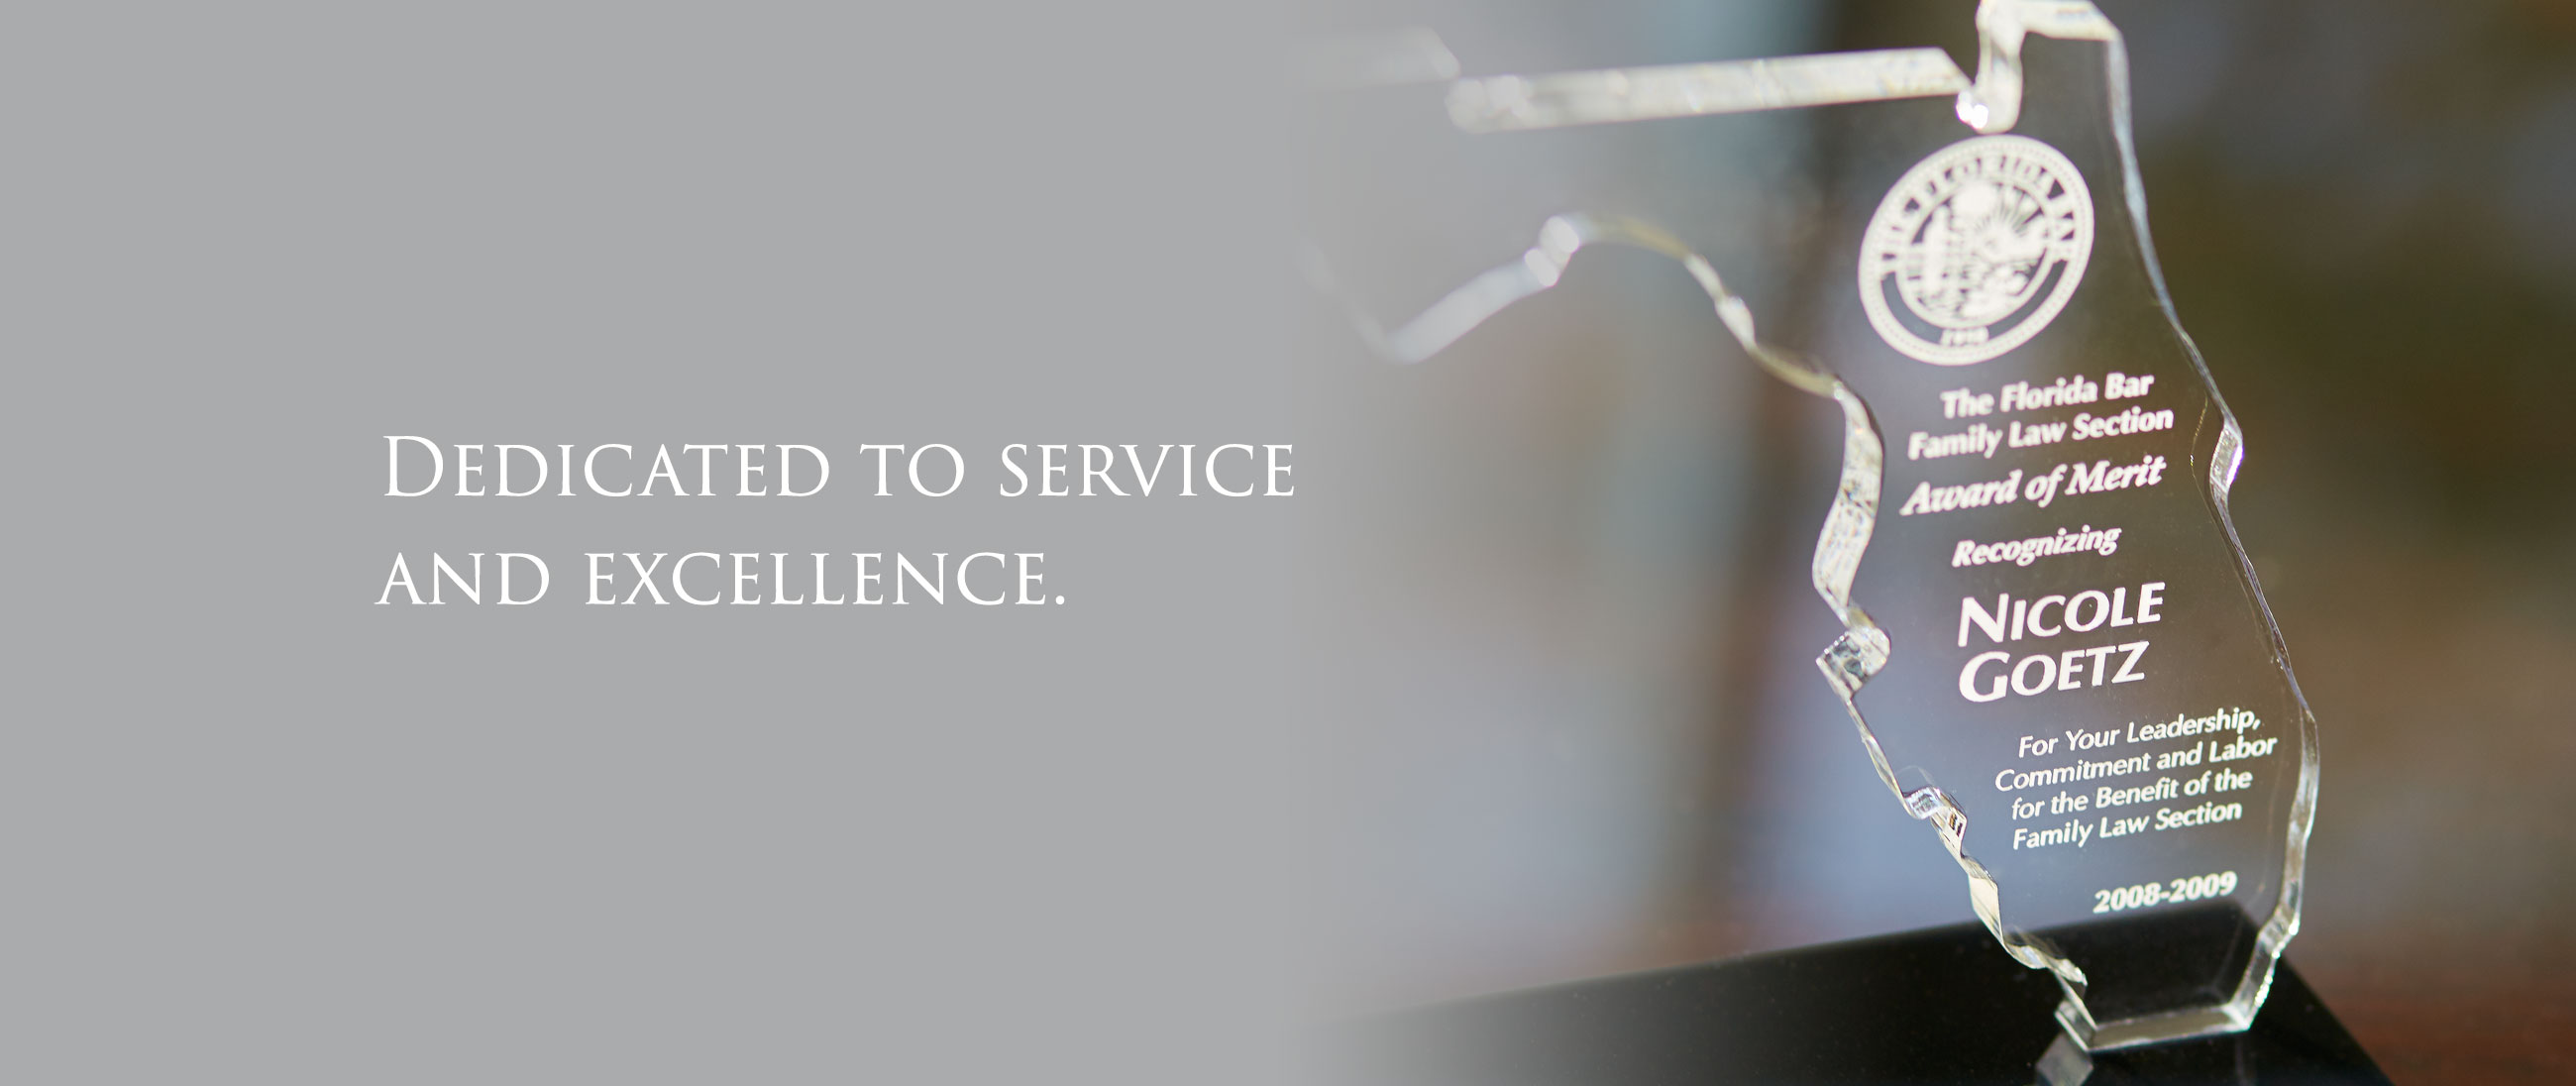 Dedicated to Service and Excellence